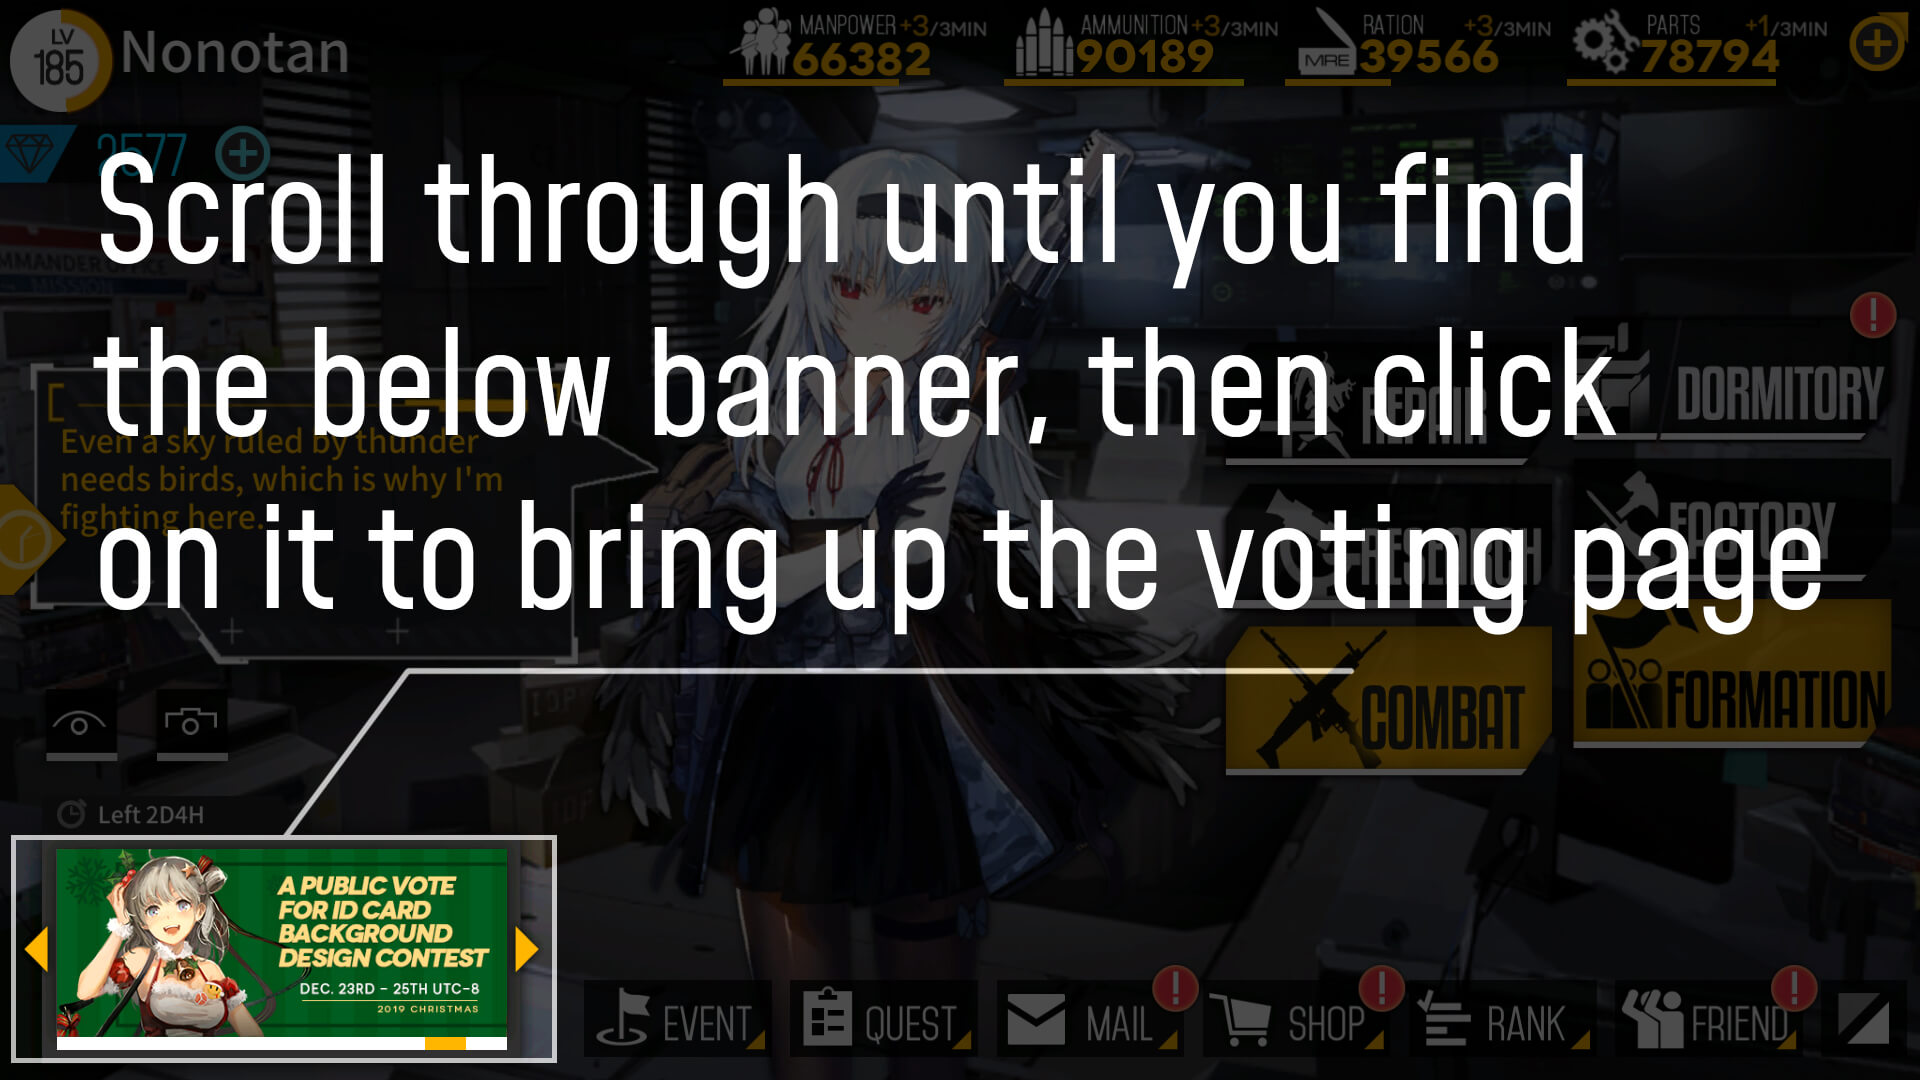 Screenshot showing where the in-game voting option is located.